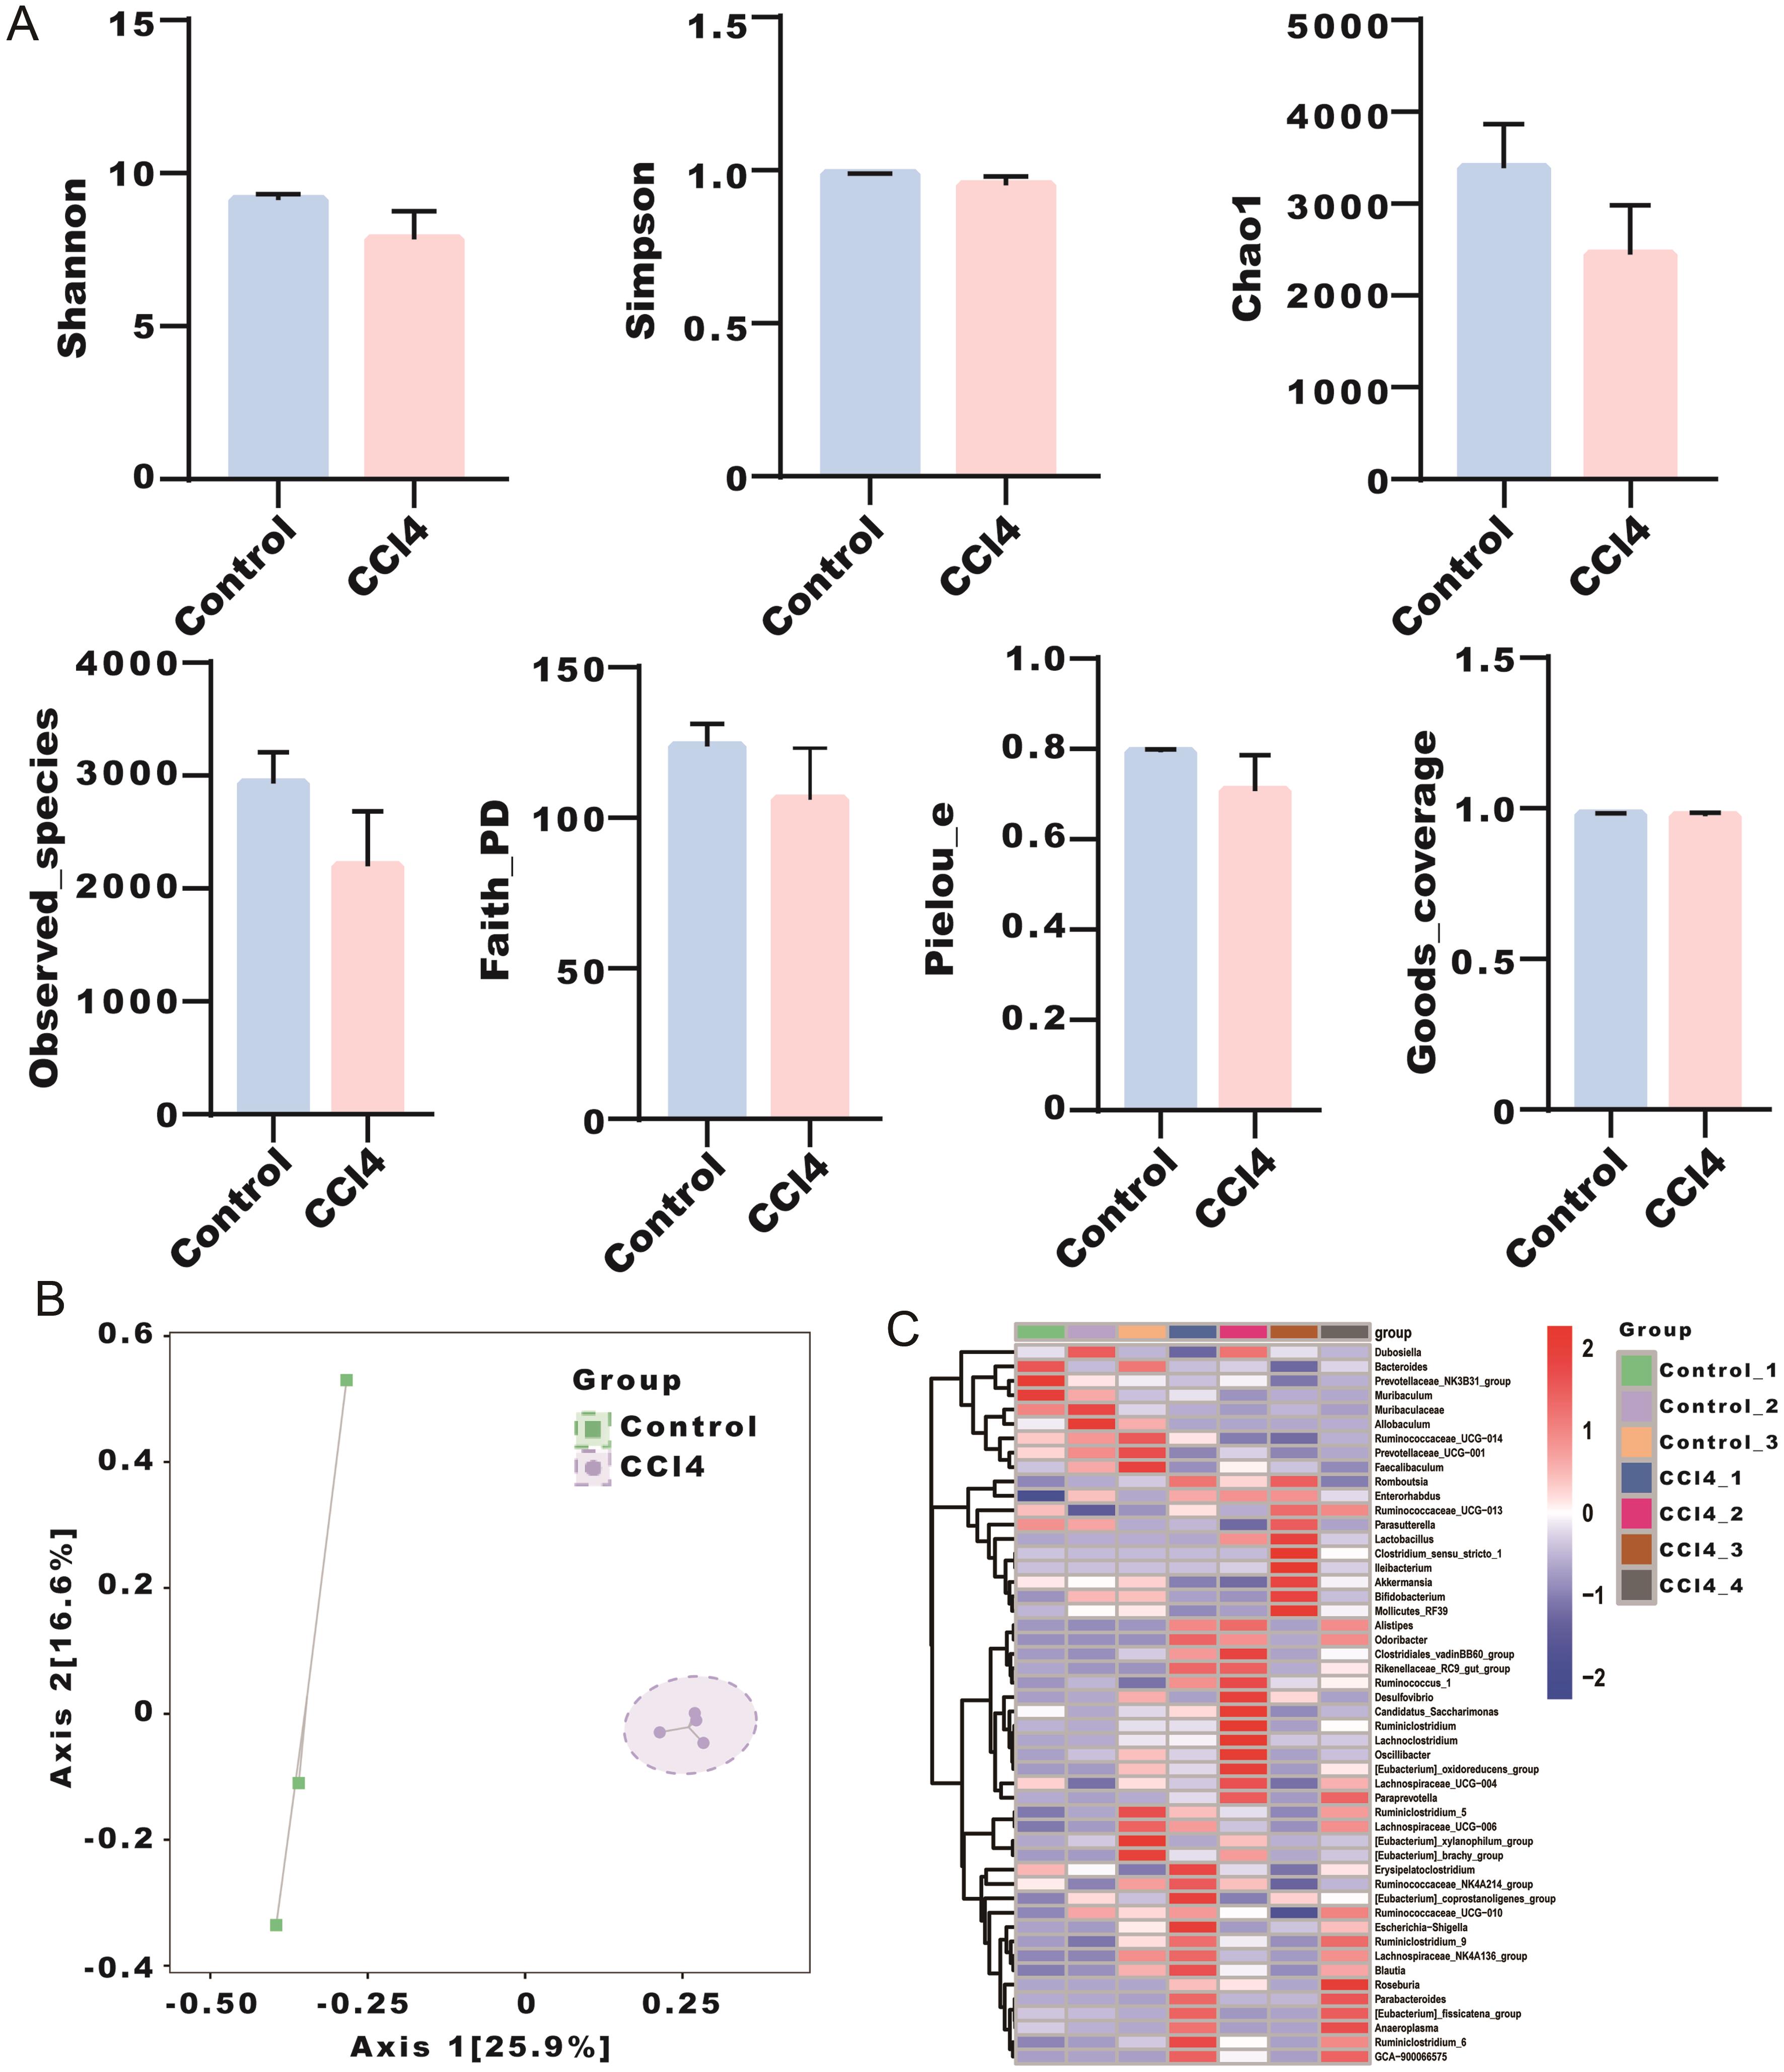 Comparisons of alpha and beta diversity between control and CCl4-induced liver cirrhosis mice.